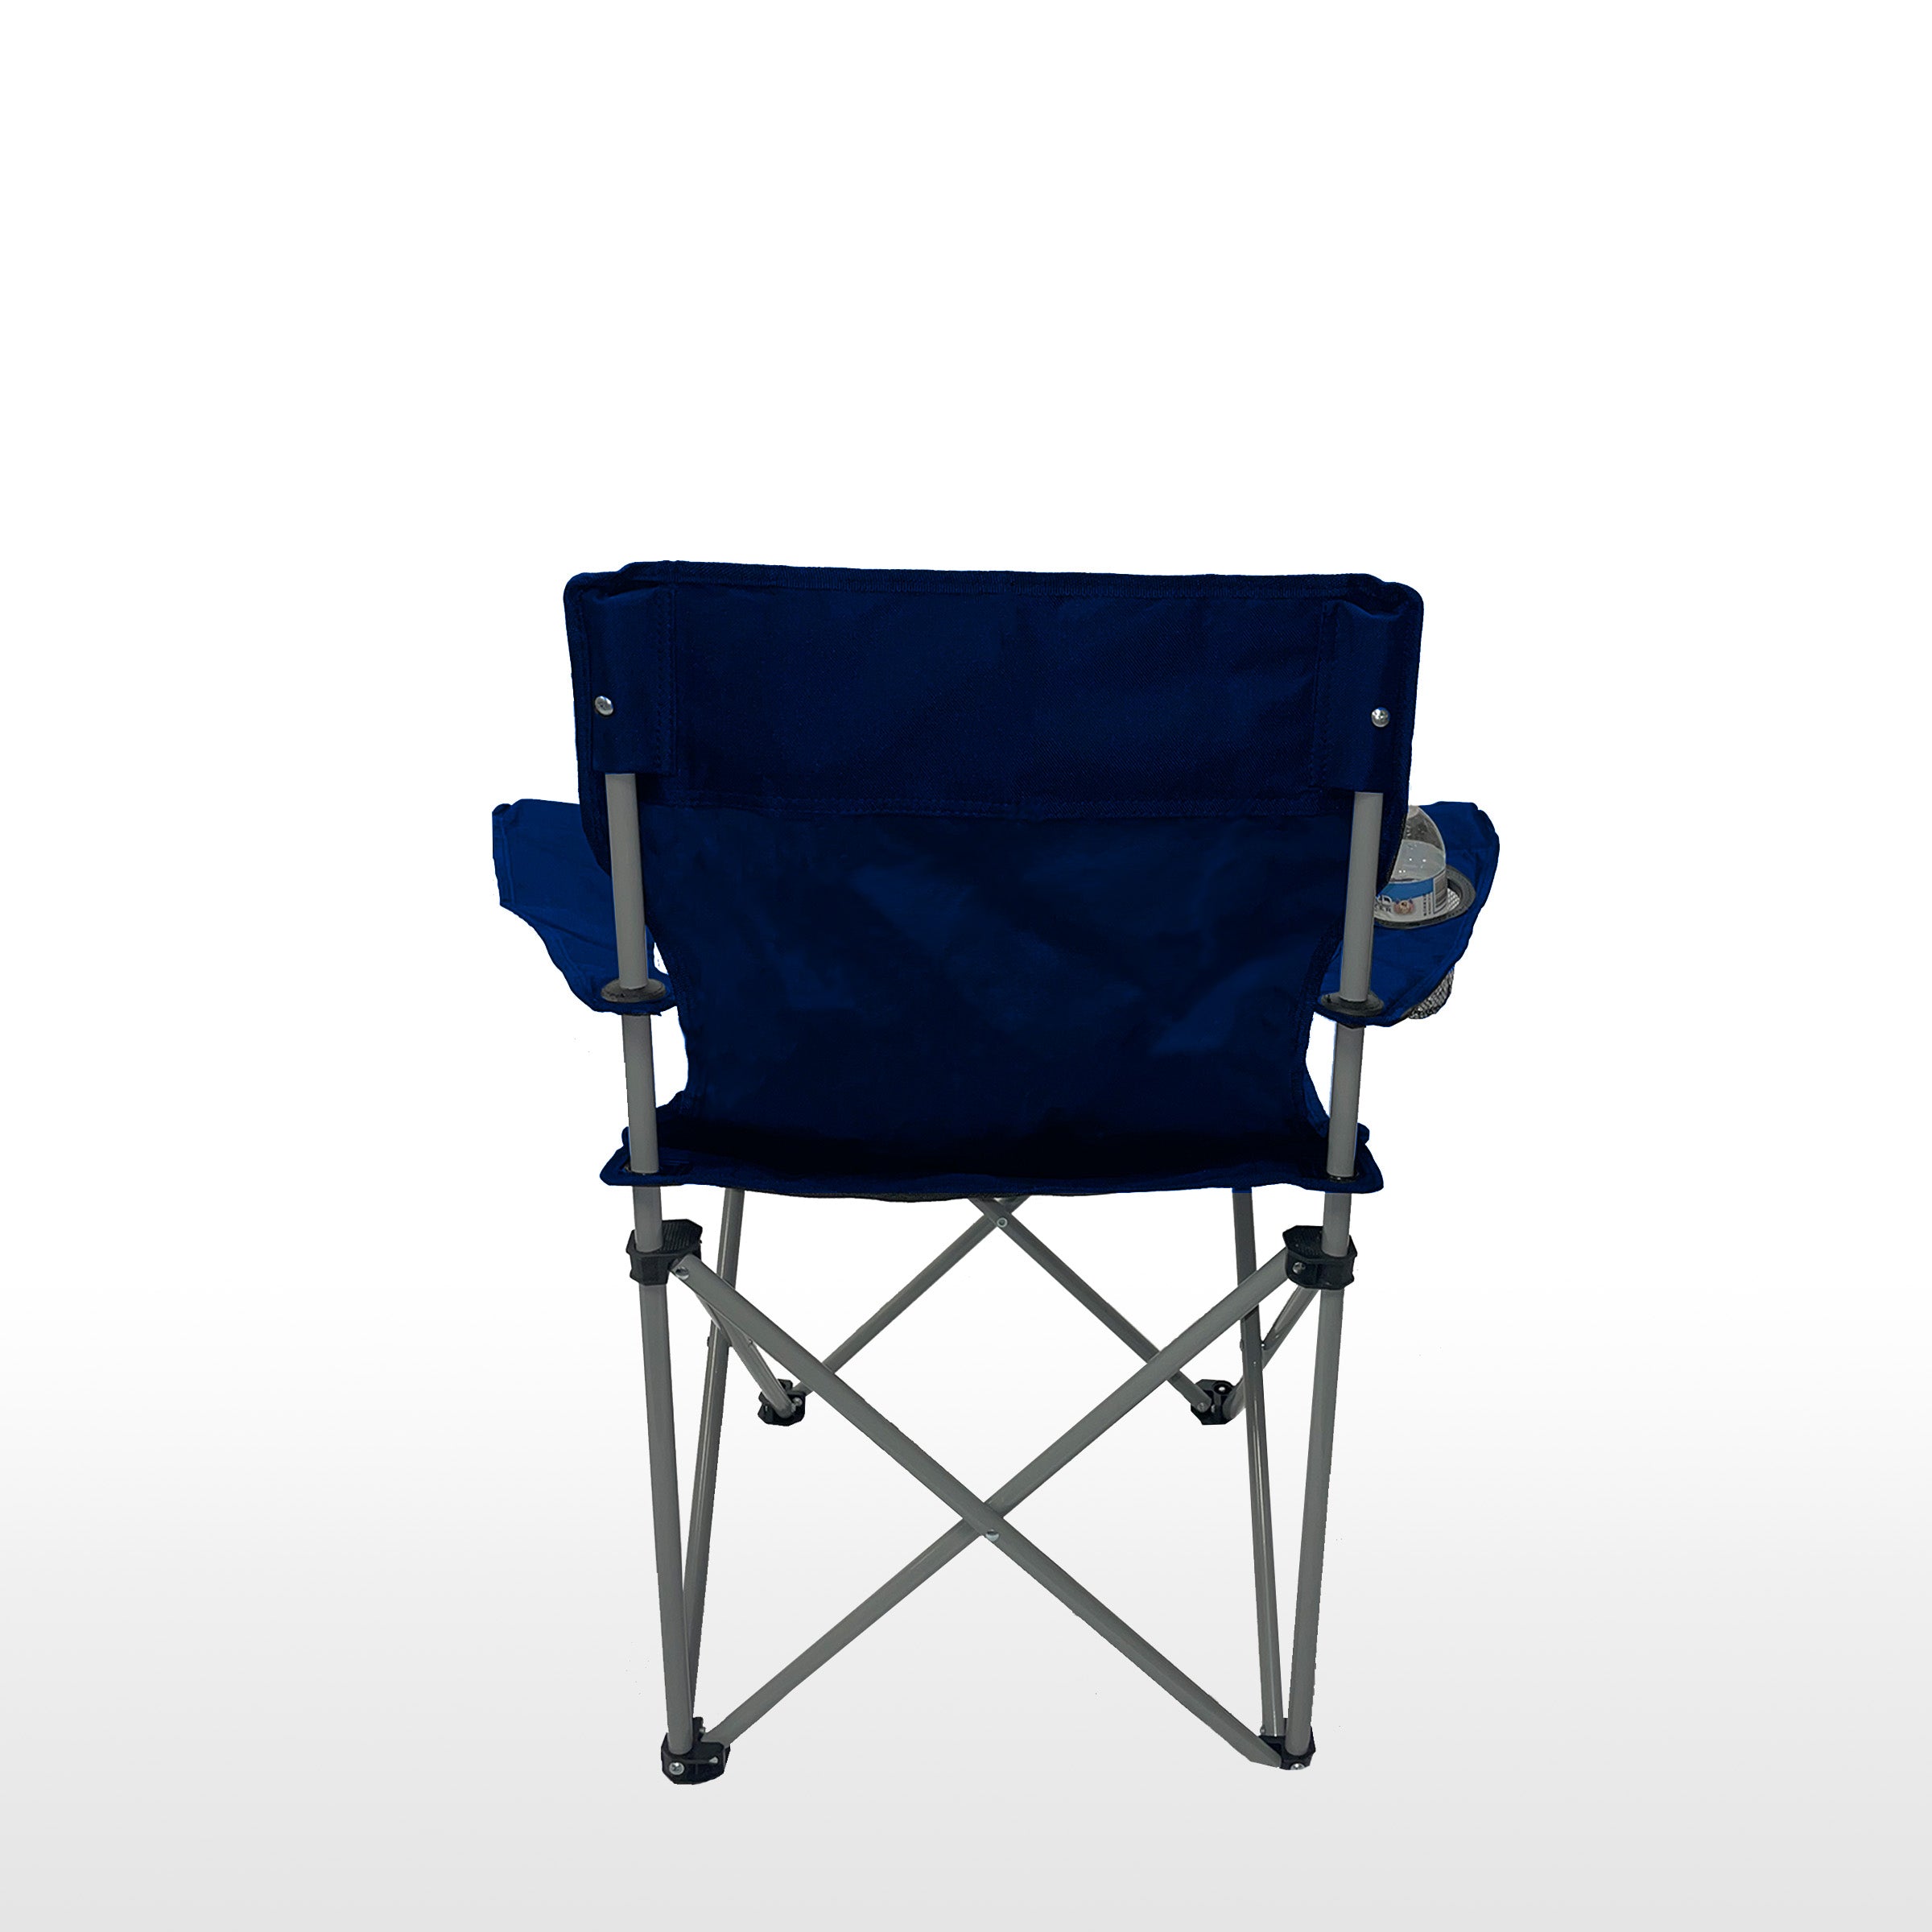 Deluxe Adult Quad Tailgate Chair Camping Portable Chair by Chaby Intl